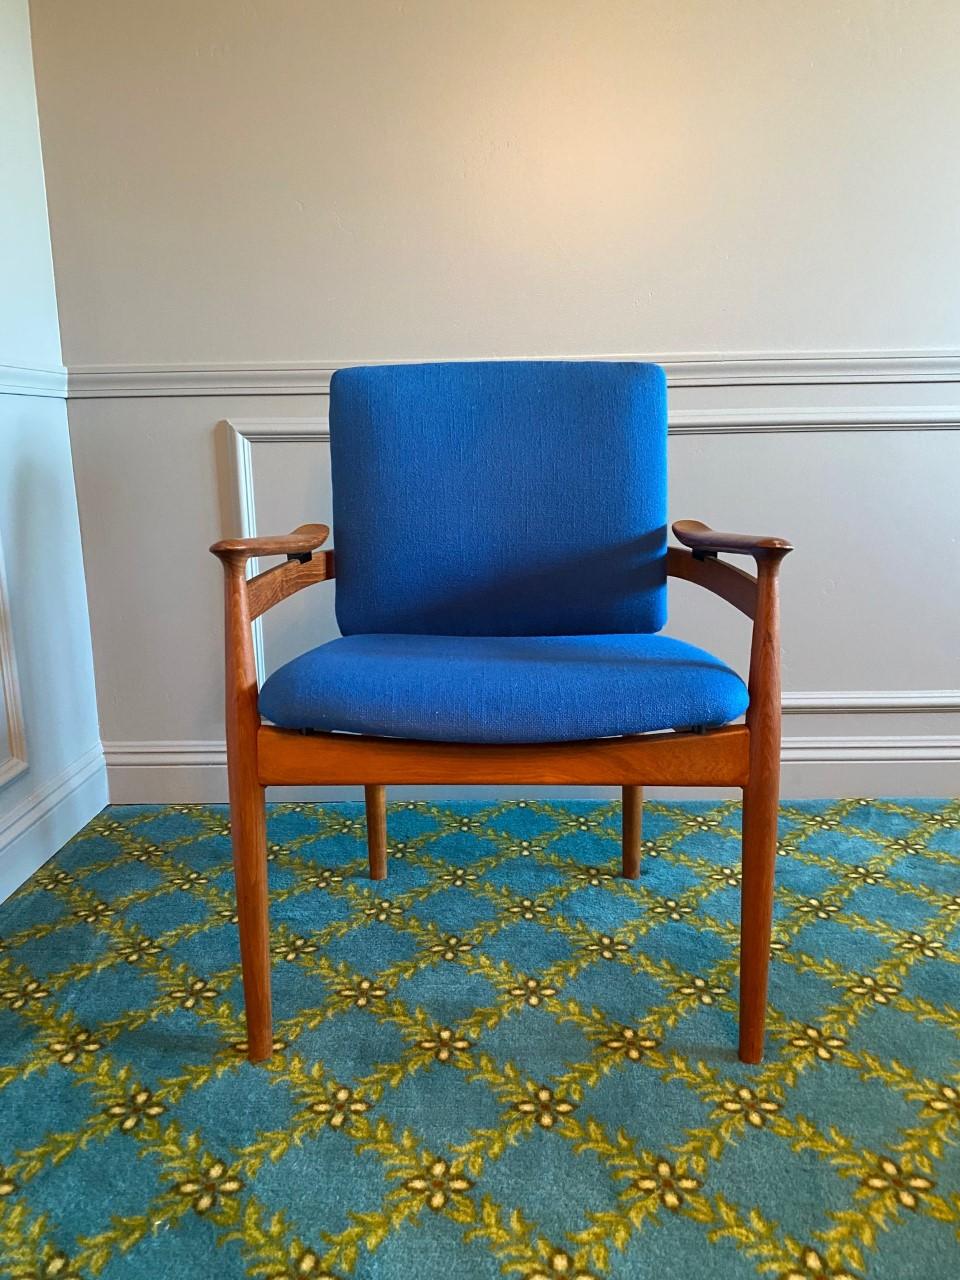 Designed by Finn Juhl for France & Son and imported by John Stuart, this handsome set of chairs features generous and comfortable seats that float within teak frames. They are upholstered in an original beautiful blue boucle fabric. In great